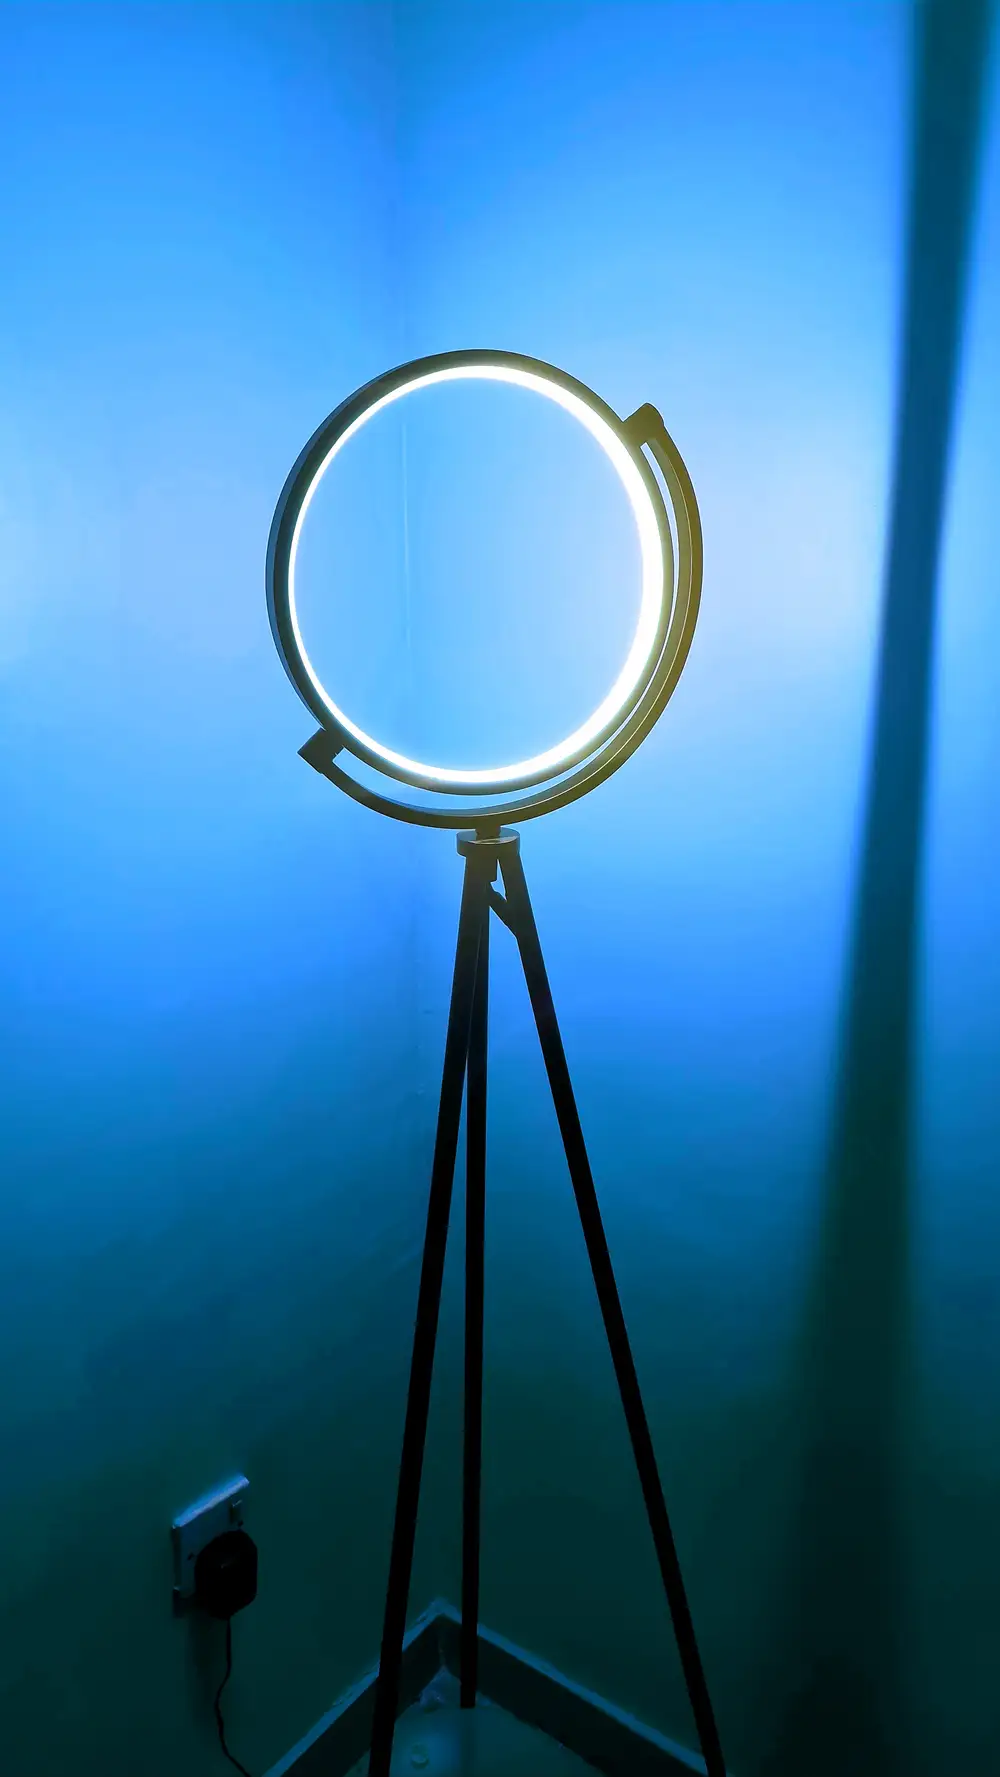 An image of a ring light with light on